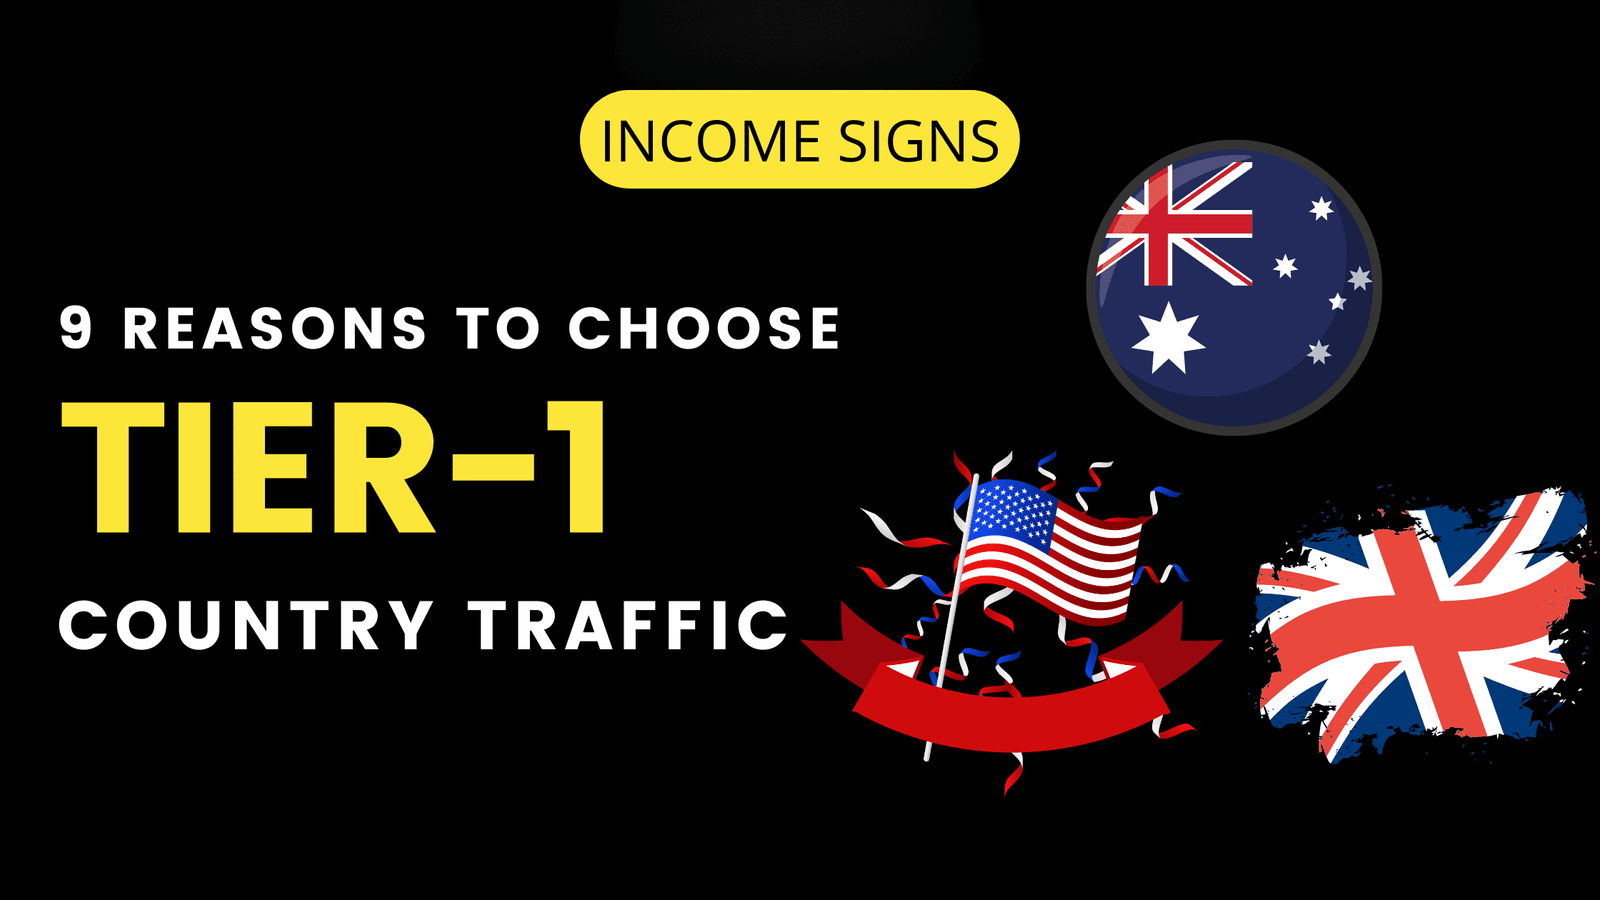 9 Reasons to Choose Tier-1 Country Traffic to Promote Your Offers Online